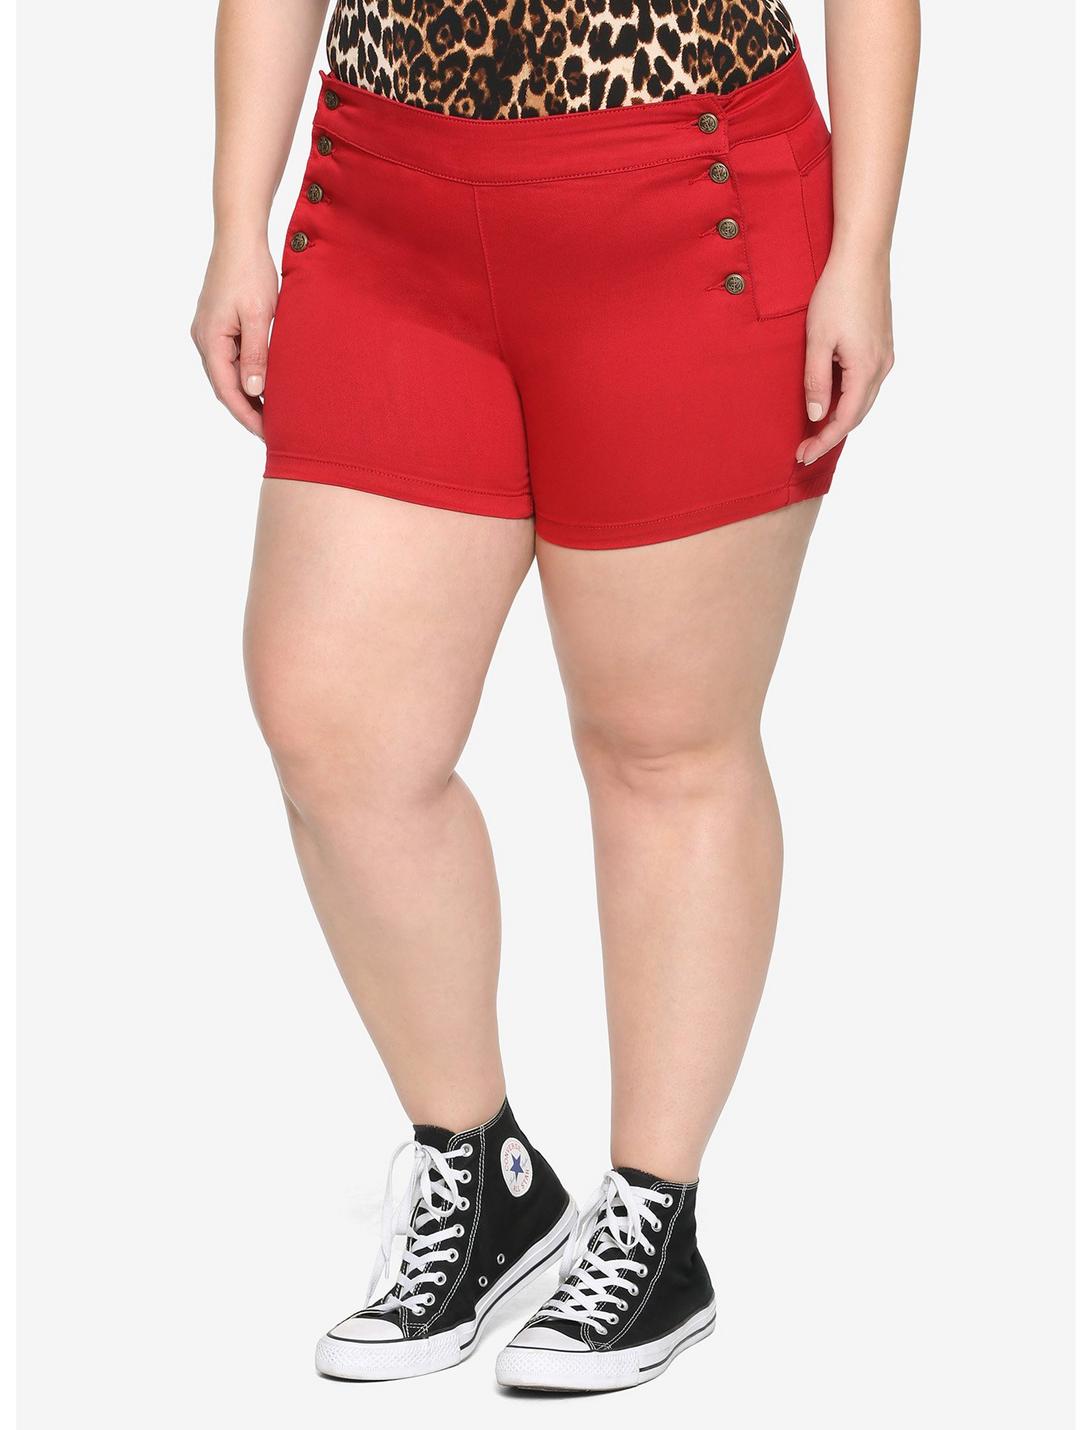 Red High-Waisted Sailor Shorts Plus Size, RED, hi-res